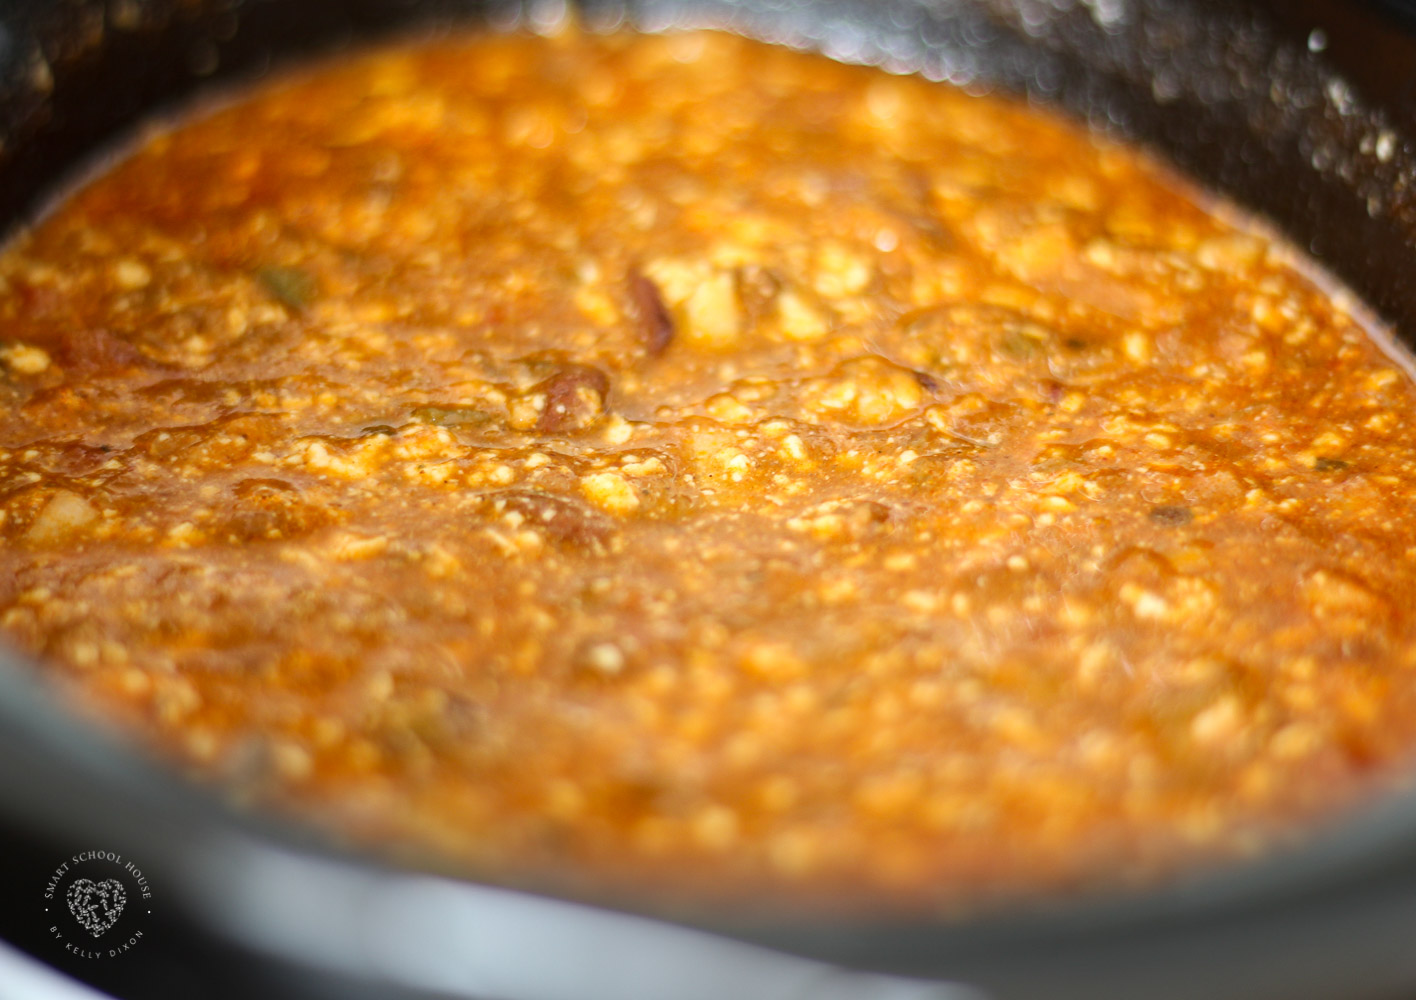 Chili cheese dip made in a slow cooker